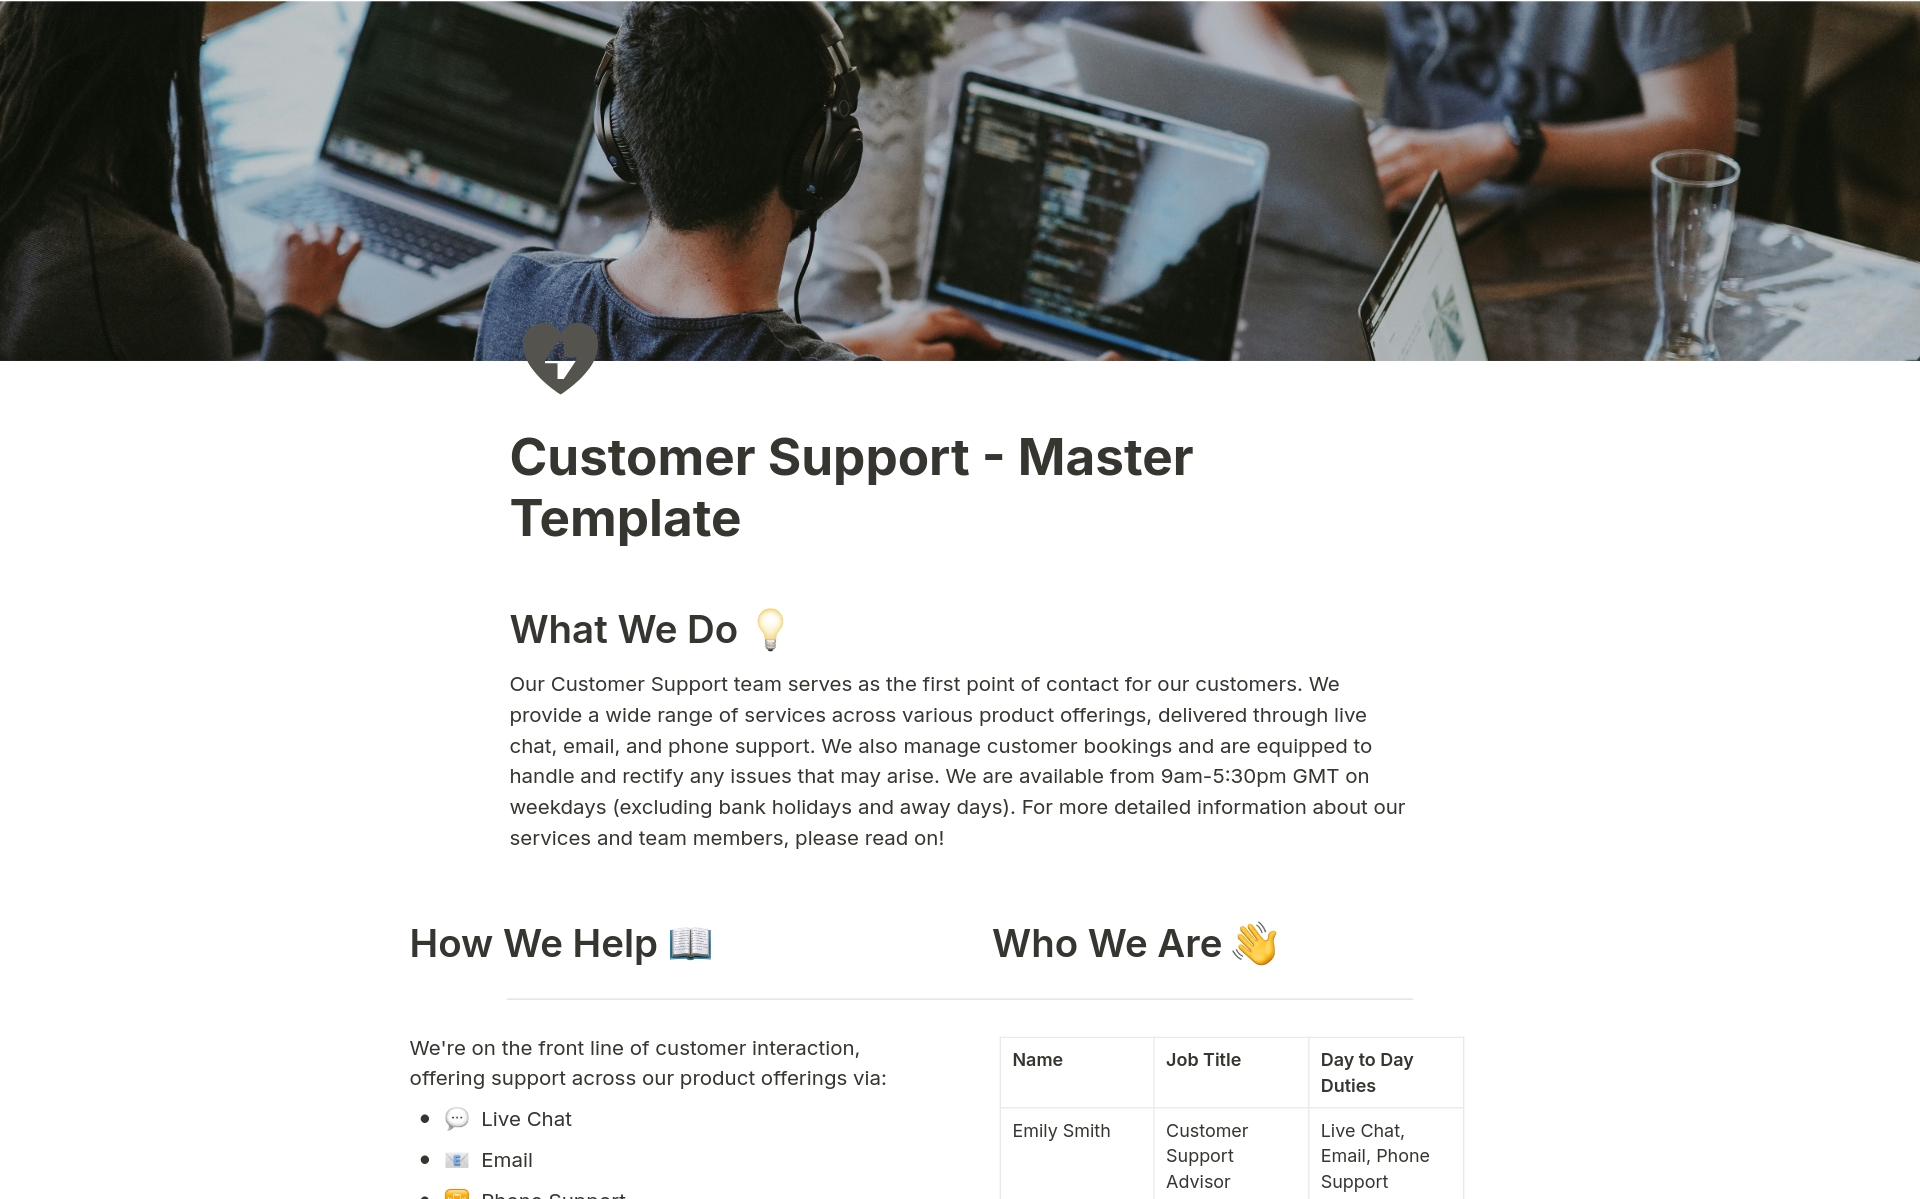 A Notion template to help empower and equip your customer support team